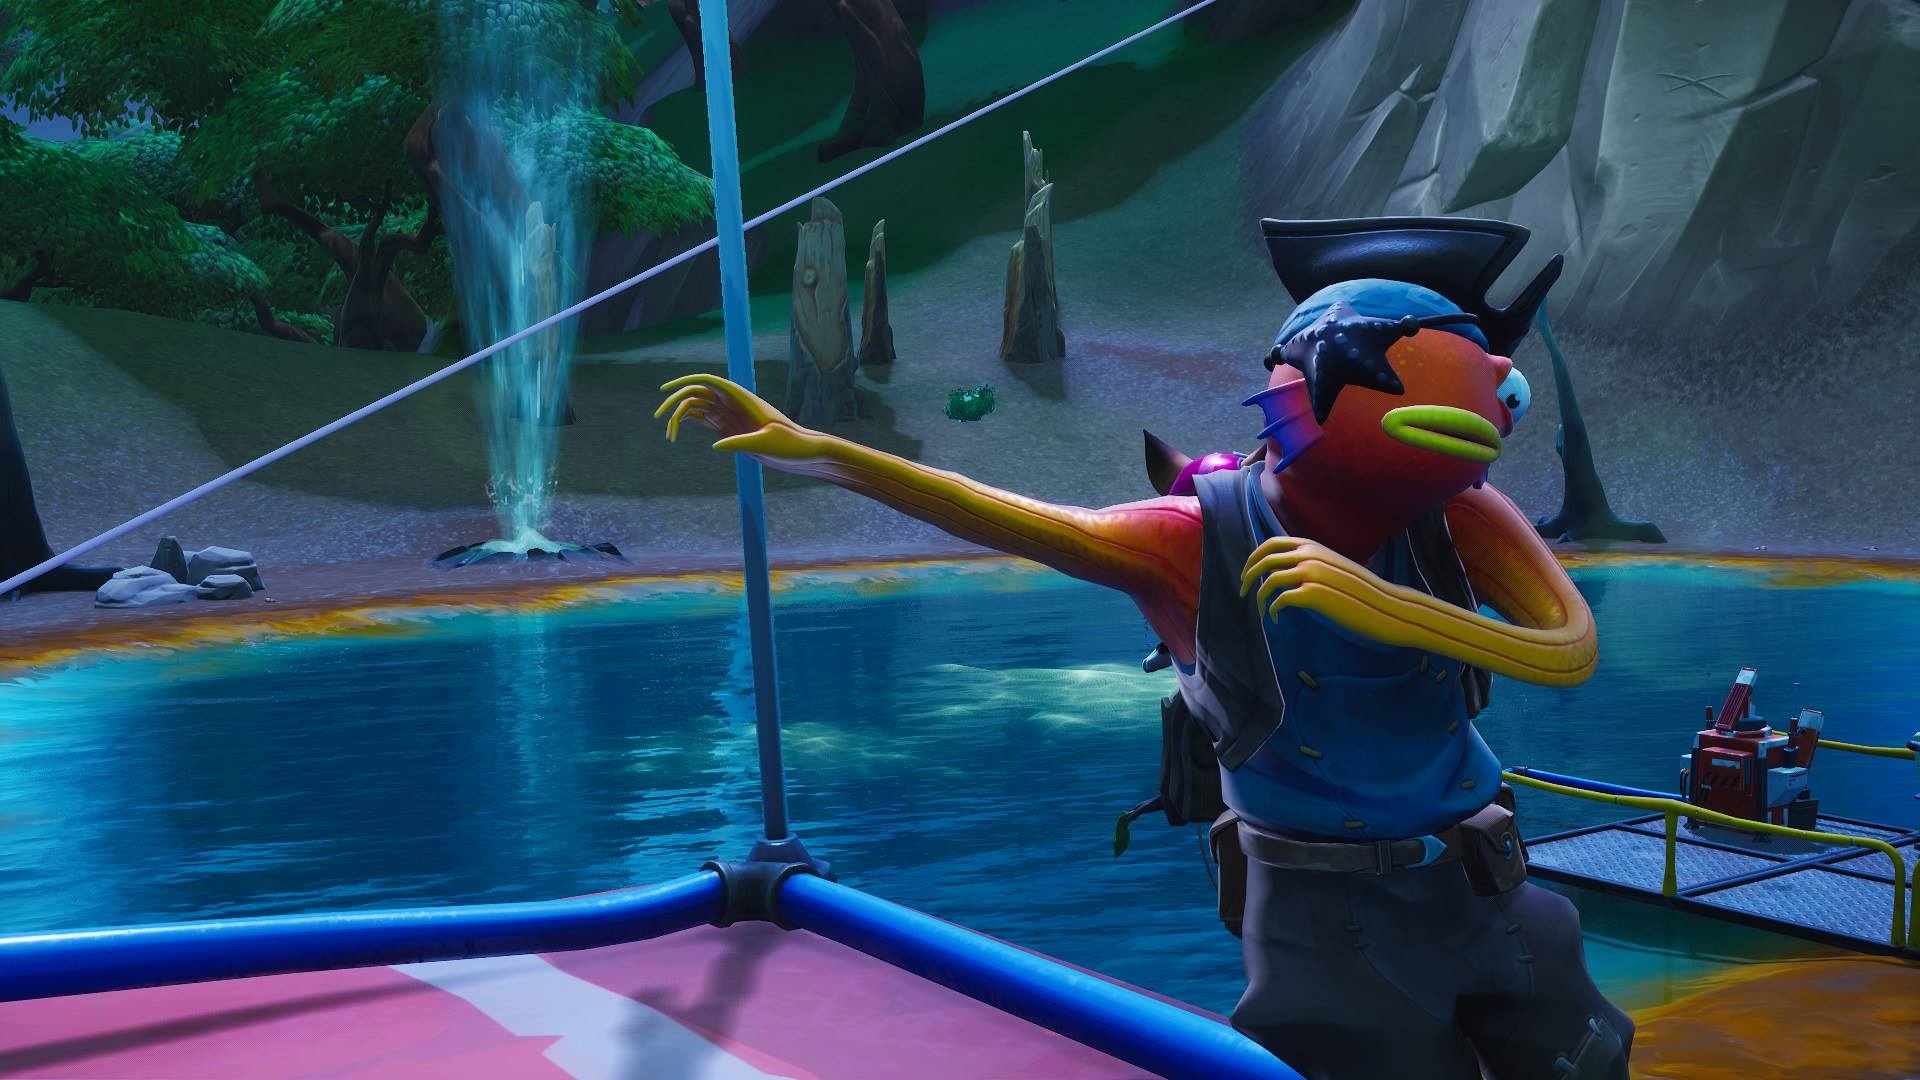 fortnite dance between ice sculptures dinosaurs hot springs locations inverse - four hot springs fortnite location